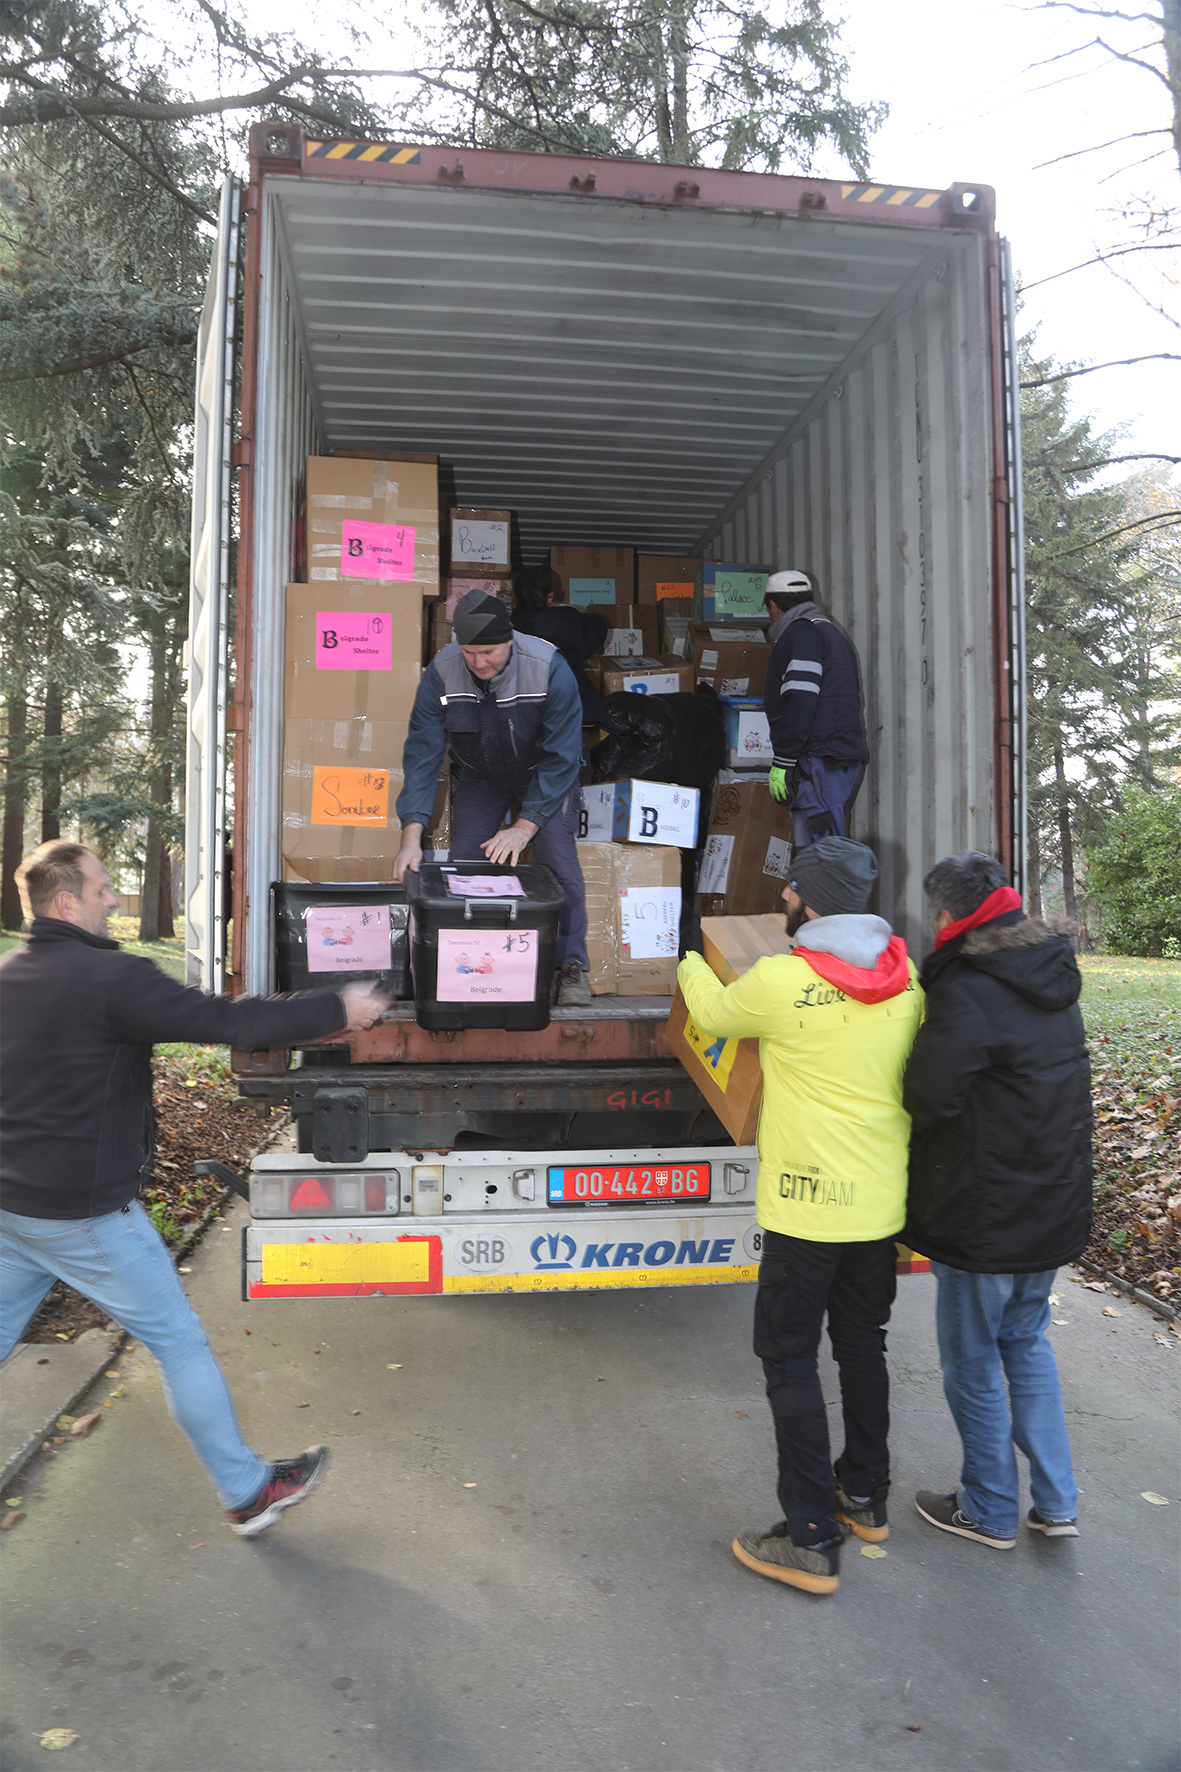 LIFELINE CHICAGO’S CHRISTMAS GIFTS FOR THE ORPHANS ARRIVE AT THE ROYAL PALACE